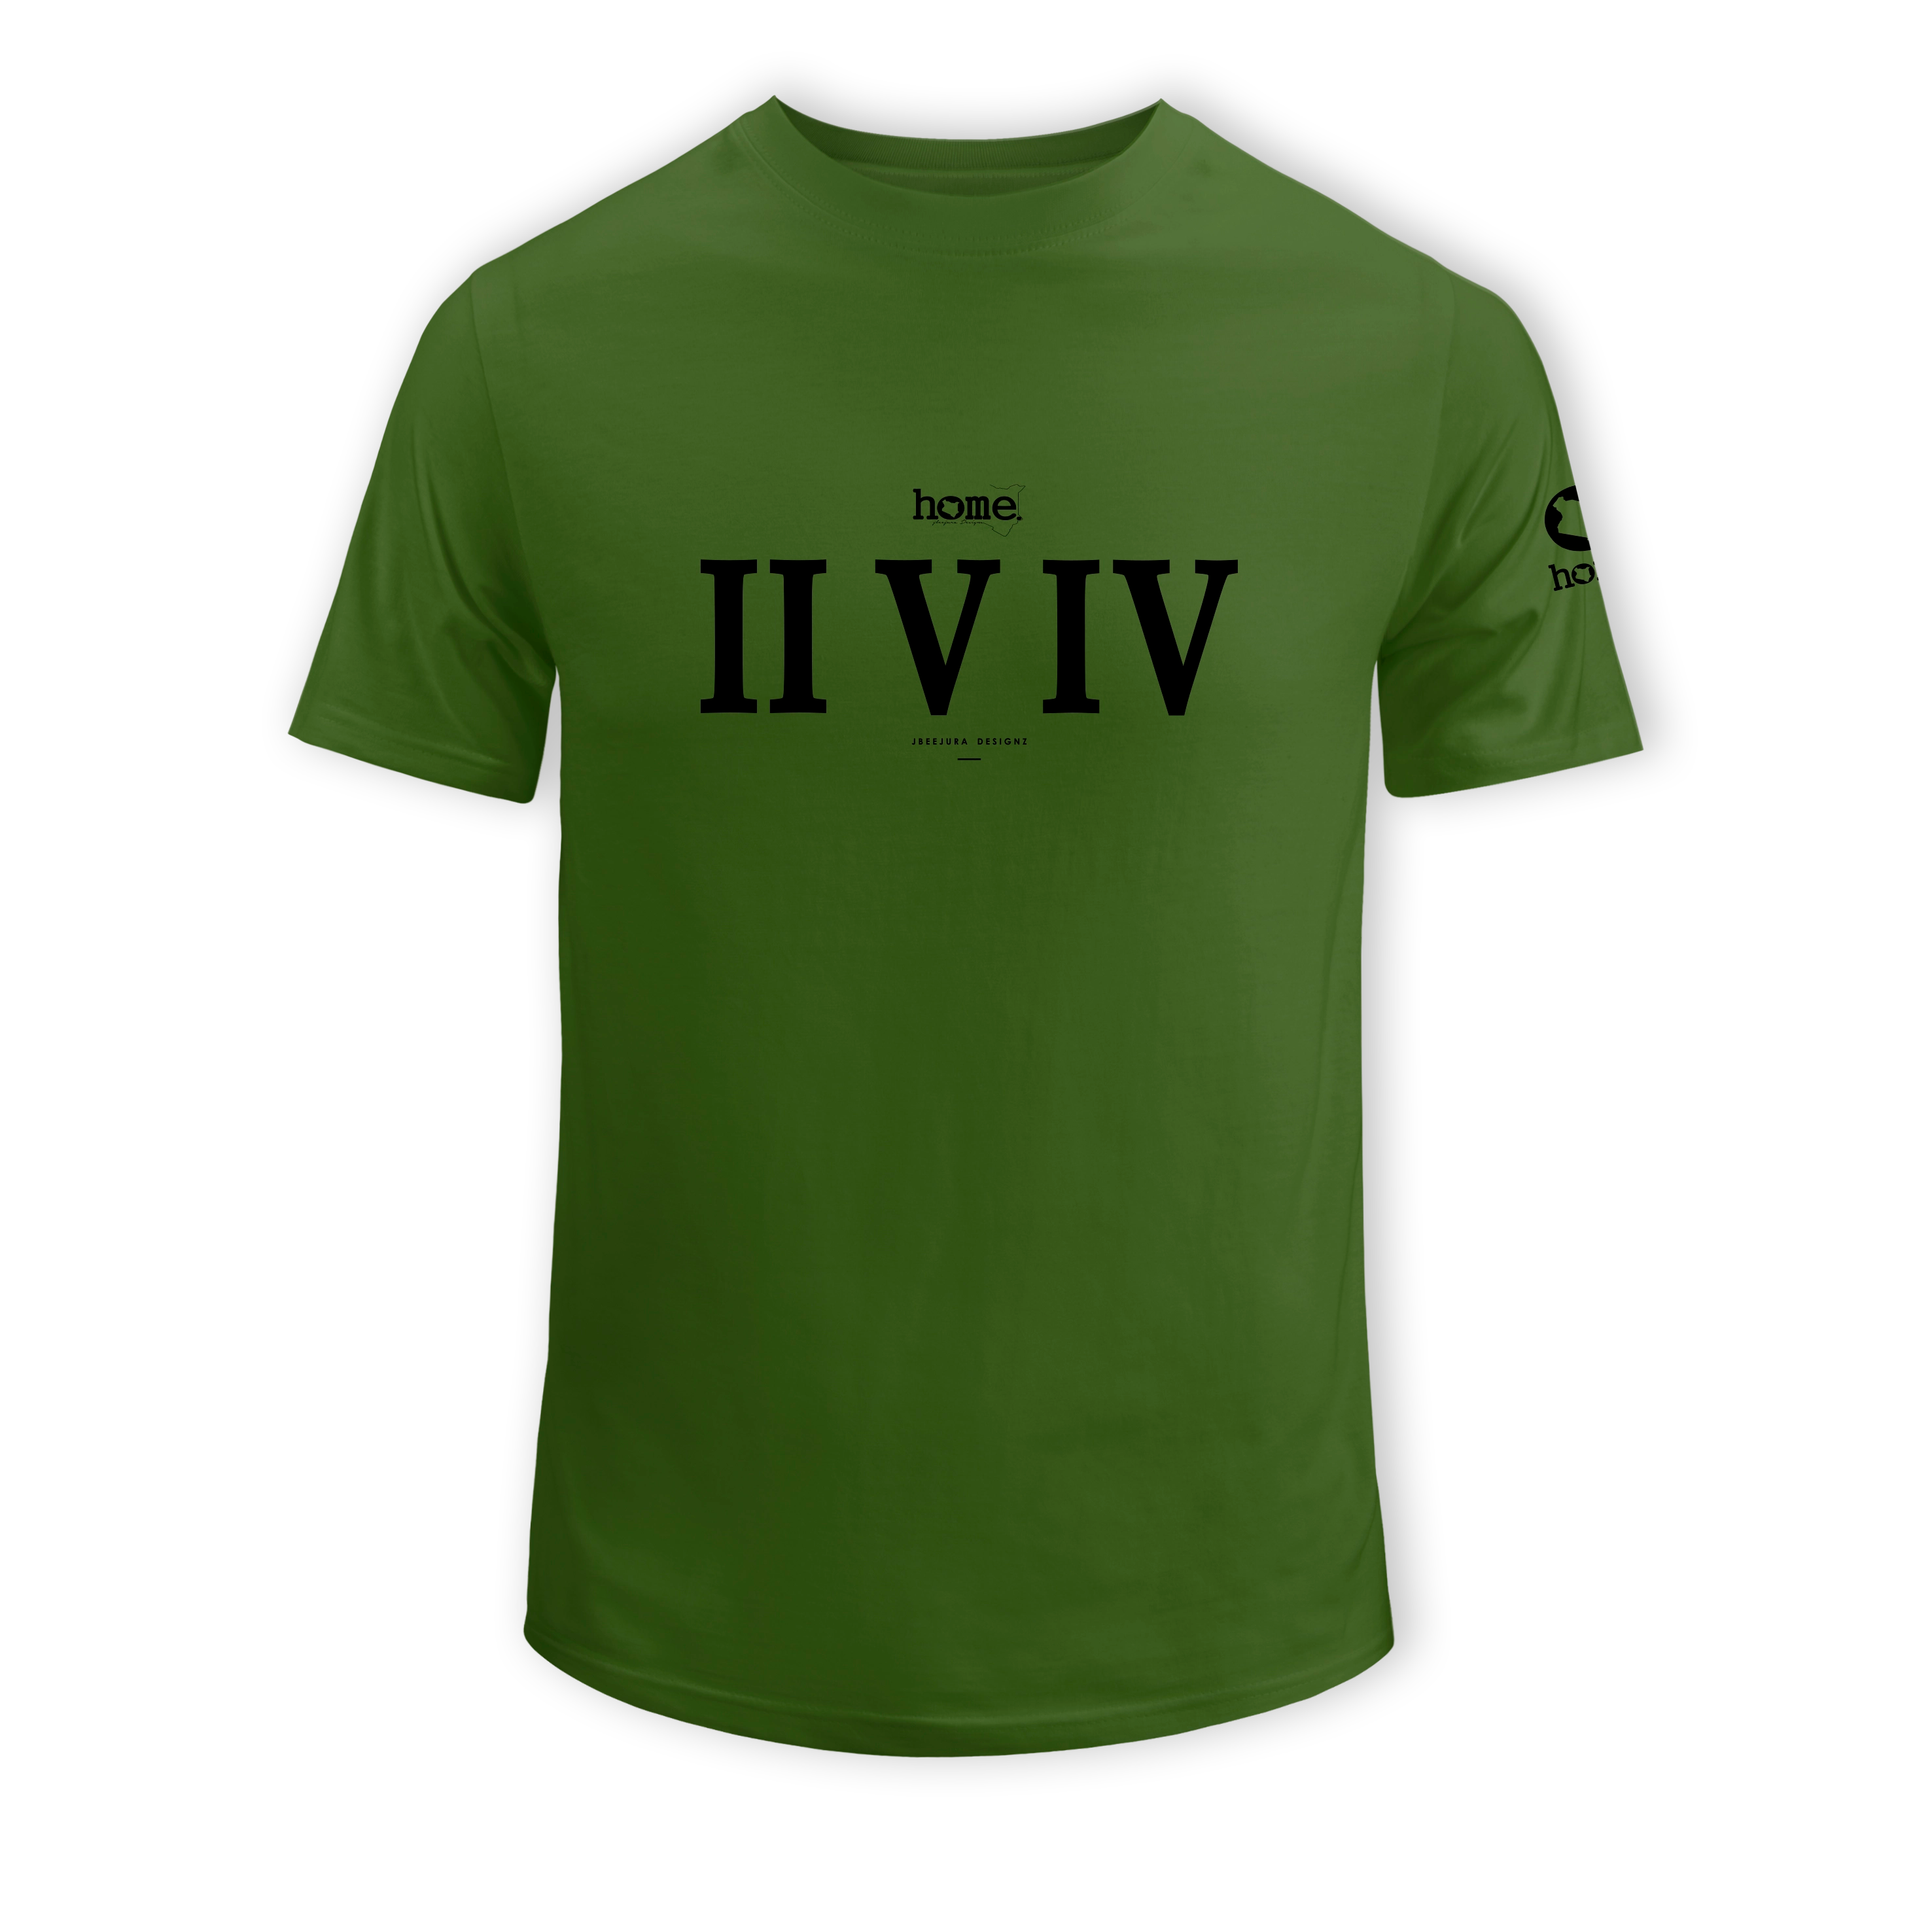 home_254 KIDS SHORT-SLEEVED JUNGLE GREEN T-SHIRT WITH A BLACK ROMAN NUMERALS PRINT – COTTON PLUS FABRIC